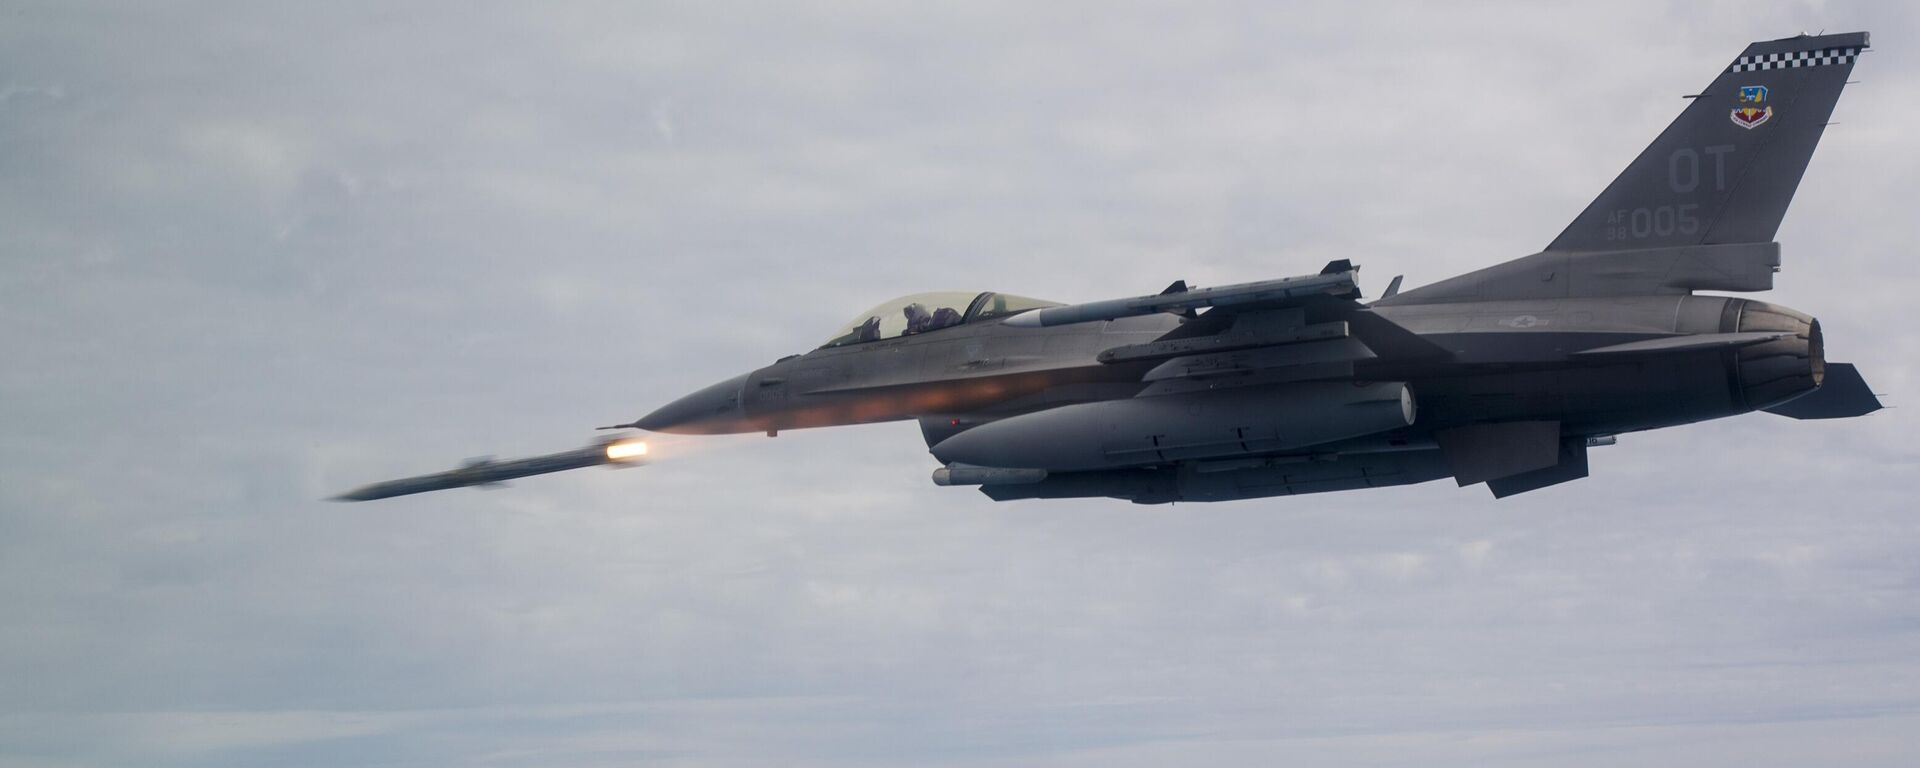 An F-16C Fighting Falcon assigned to the 85th Test Evaluation Squadron shoots an AIM-120 Advanced Medium-Range Air-to-Air Missile, or AMRAAM over testing ranges near Eglin Air Force Base, Fla., March 19, 2019. - Sputnik International, 1920, 06.03.2023